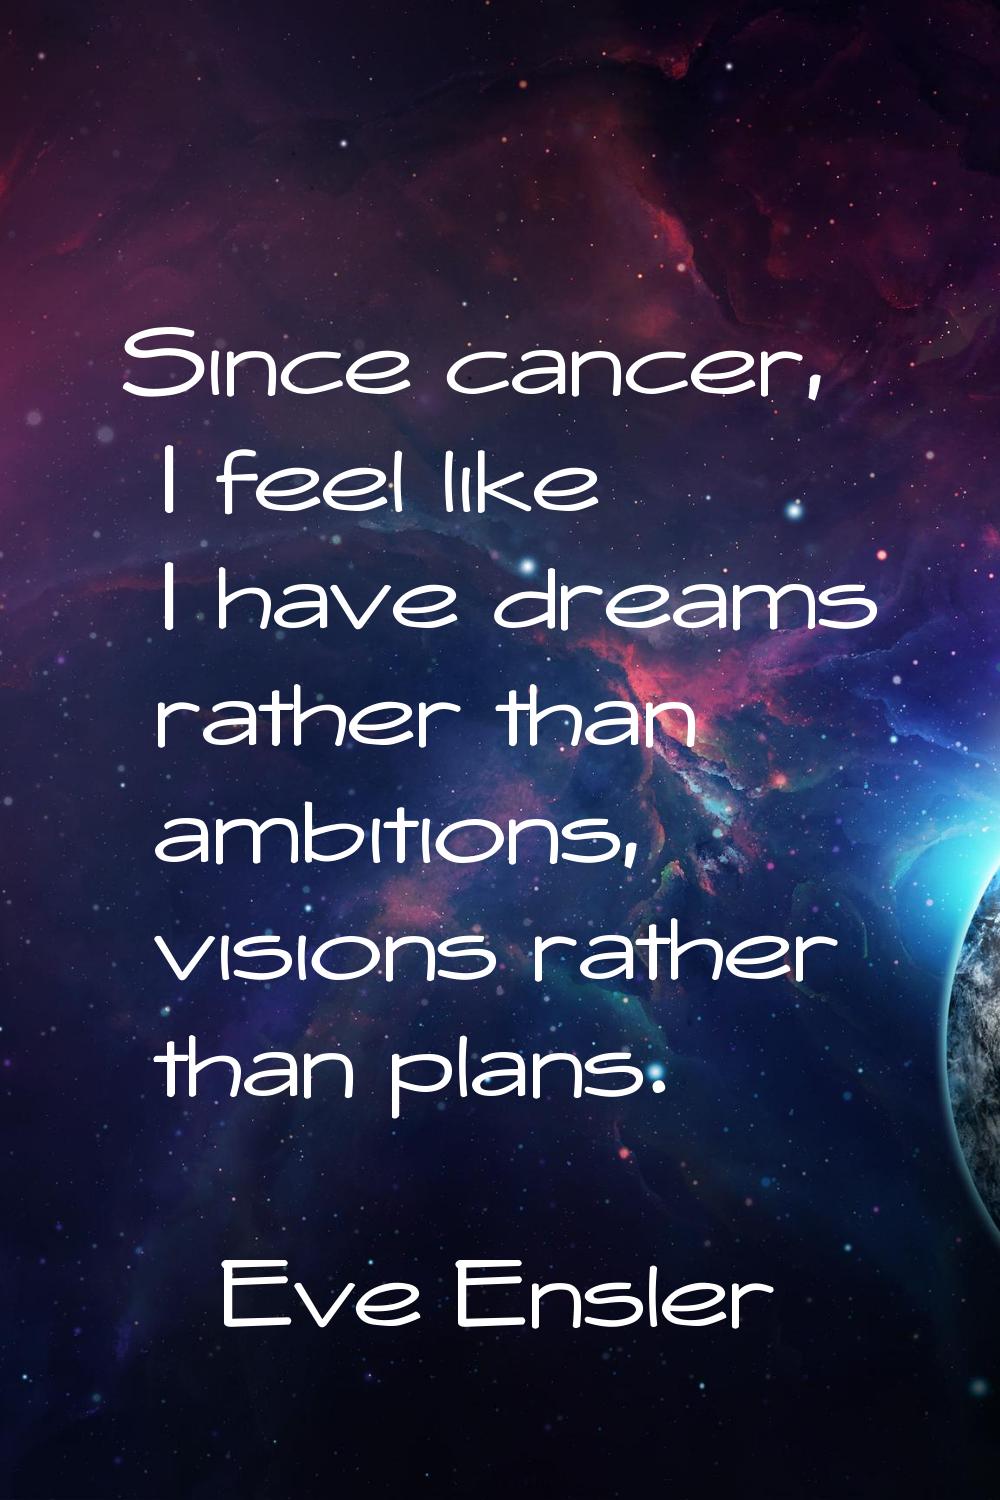 Since cancer, I feel like I have dreams rather than ambitions, visions rather than plans.